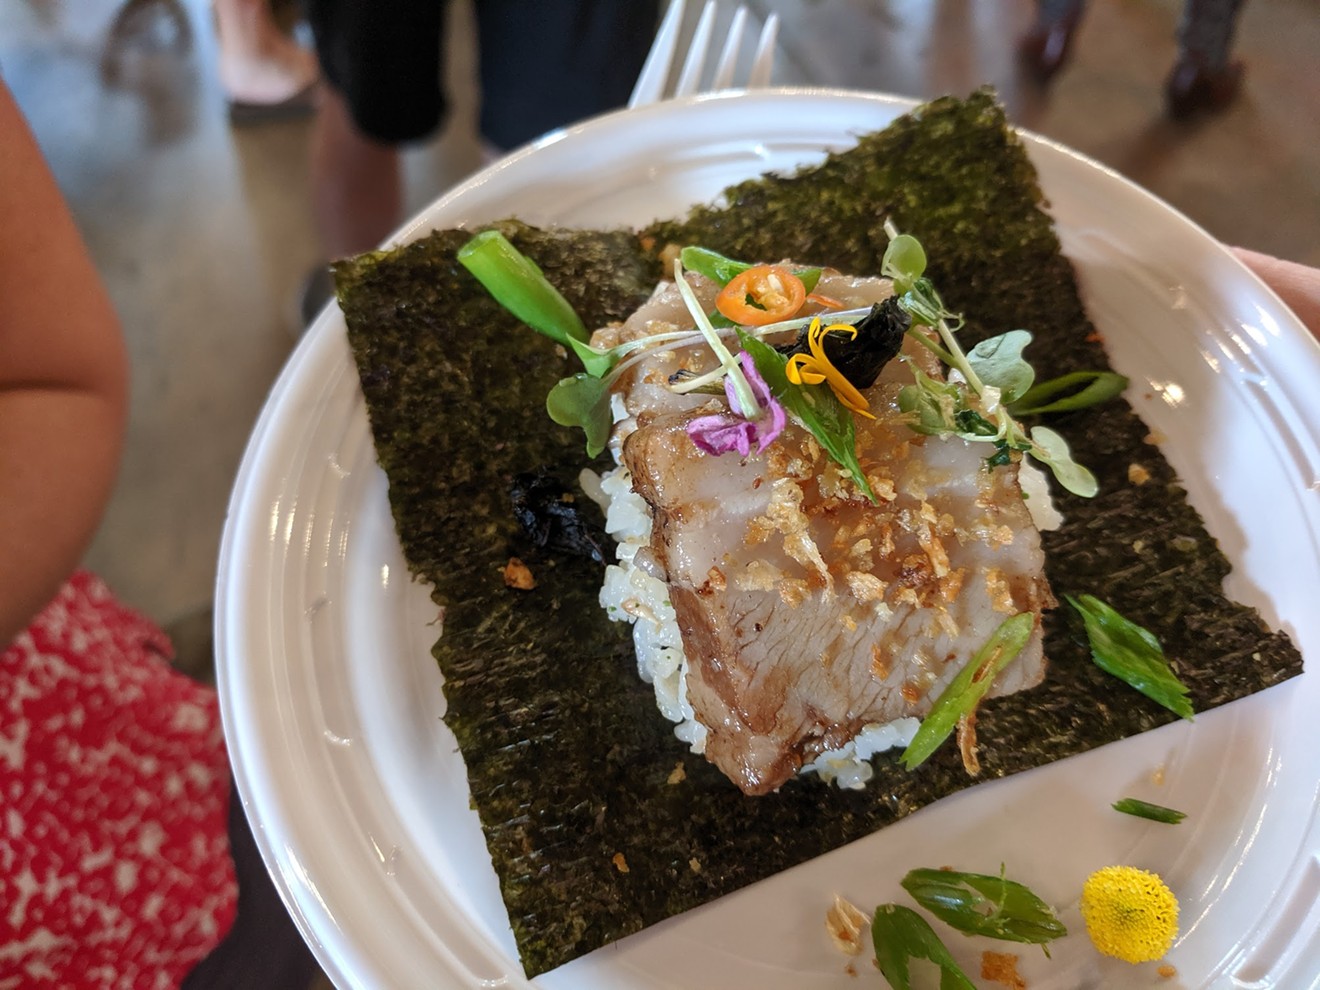 Ulam Modern Filipino Kitchen presented pork belly on a ball of garlic fried rice and a sheet of dried seaweed, musubi-style (ish).